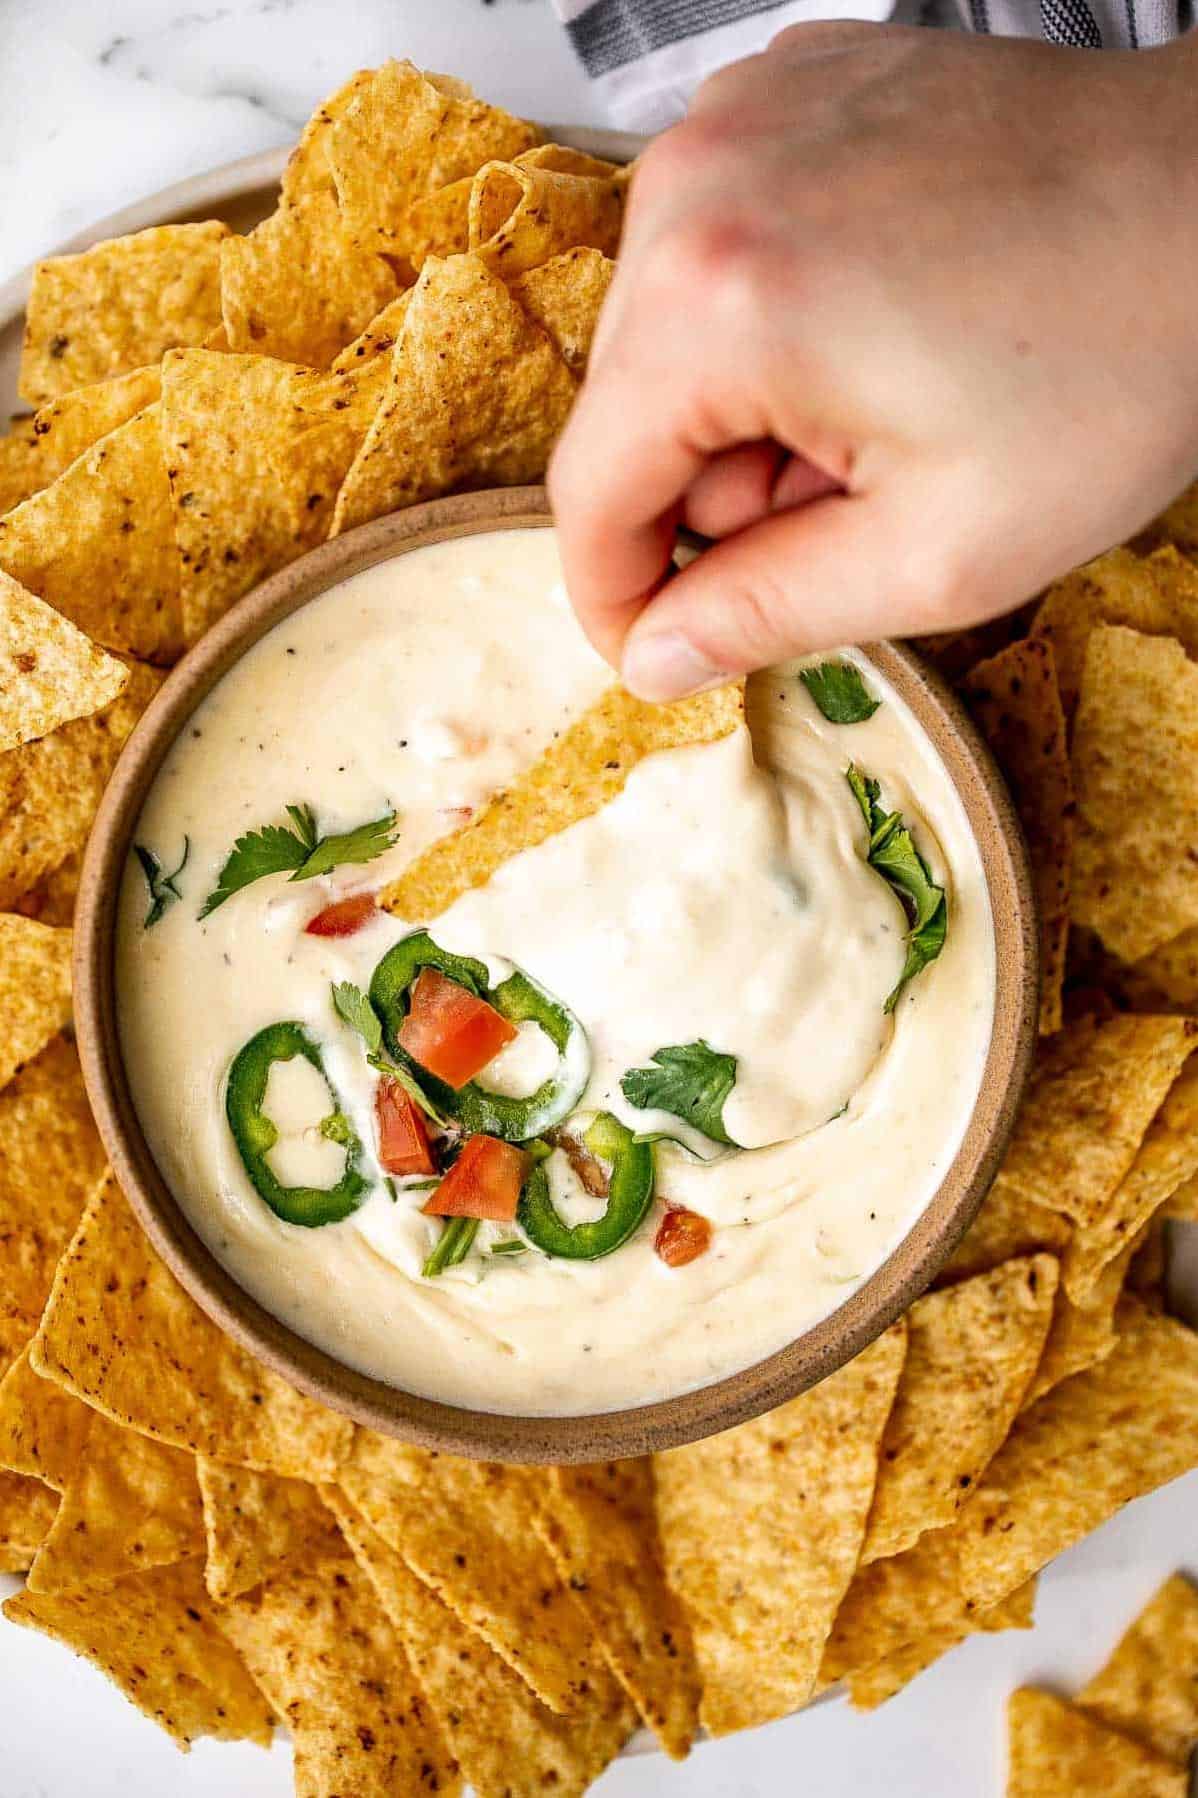  This dip is so good, you'll need to make a double batch.